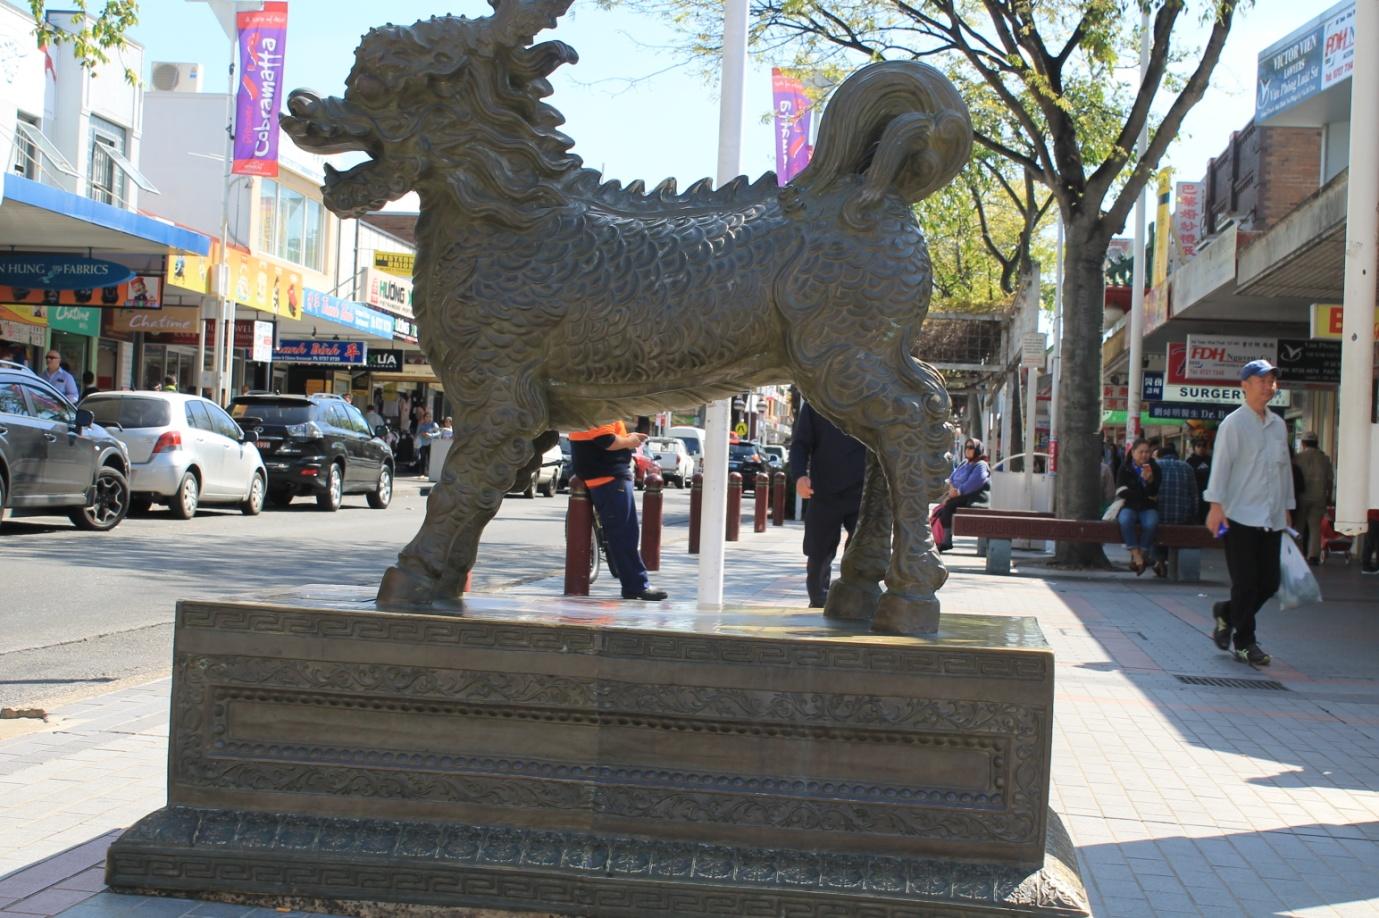 The statue of a dragon in the John St., Cabramatta, the picture was taken on 10.9.14 with a Canon camera